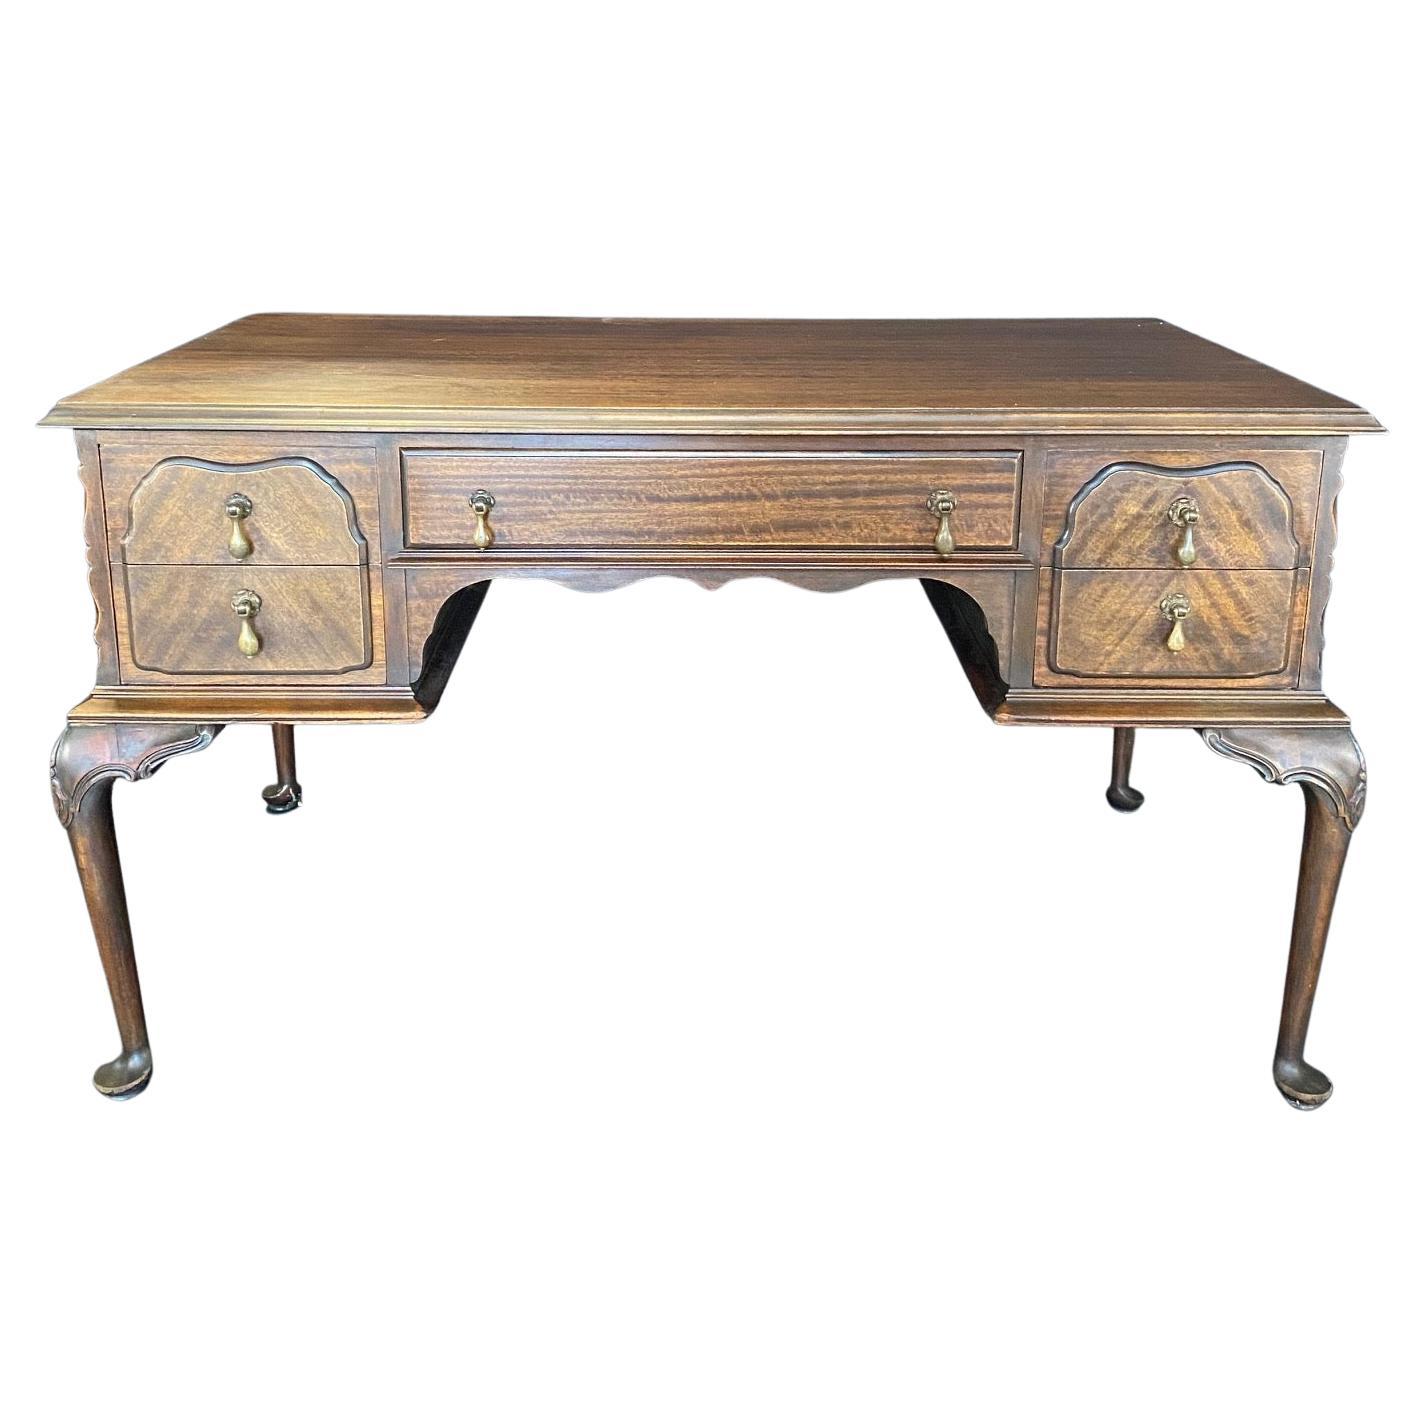 Handsome Antique French Louis XV Style Writing Table or Desk For Sale